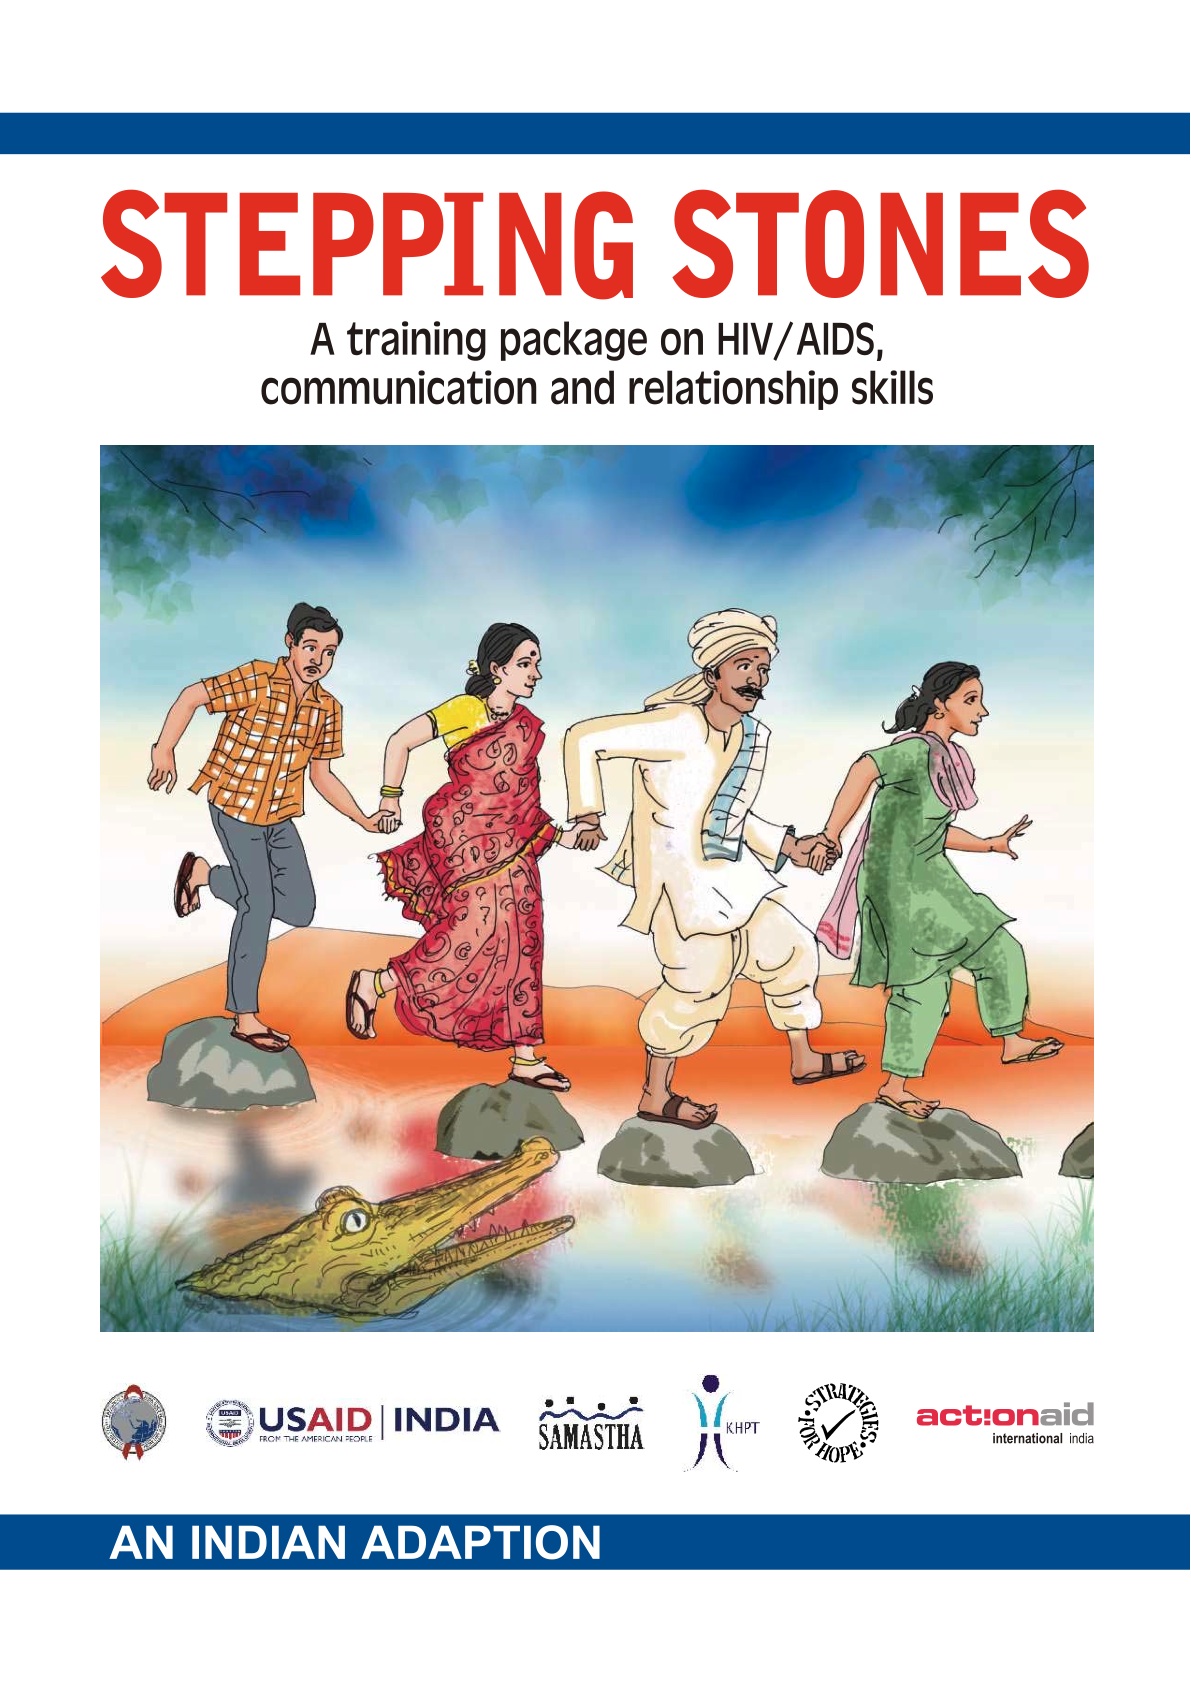 Stepping Stones in India